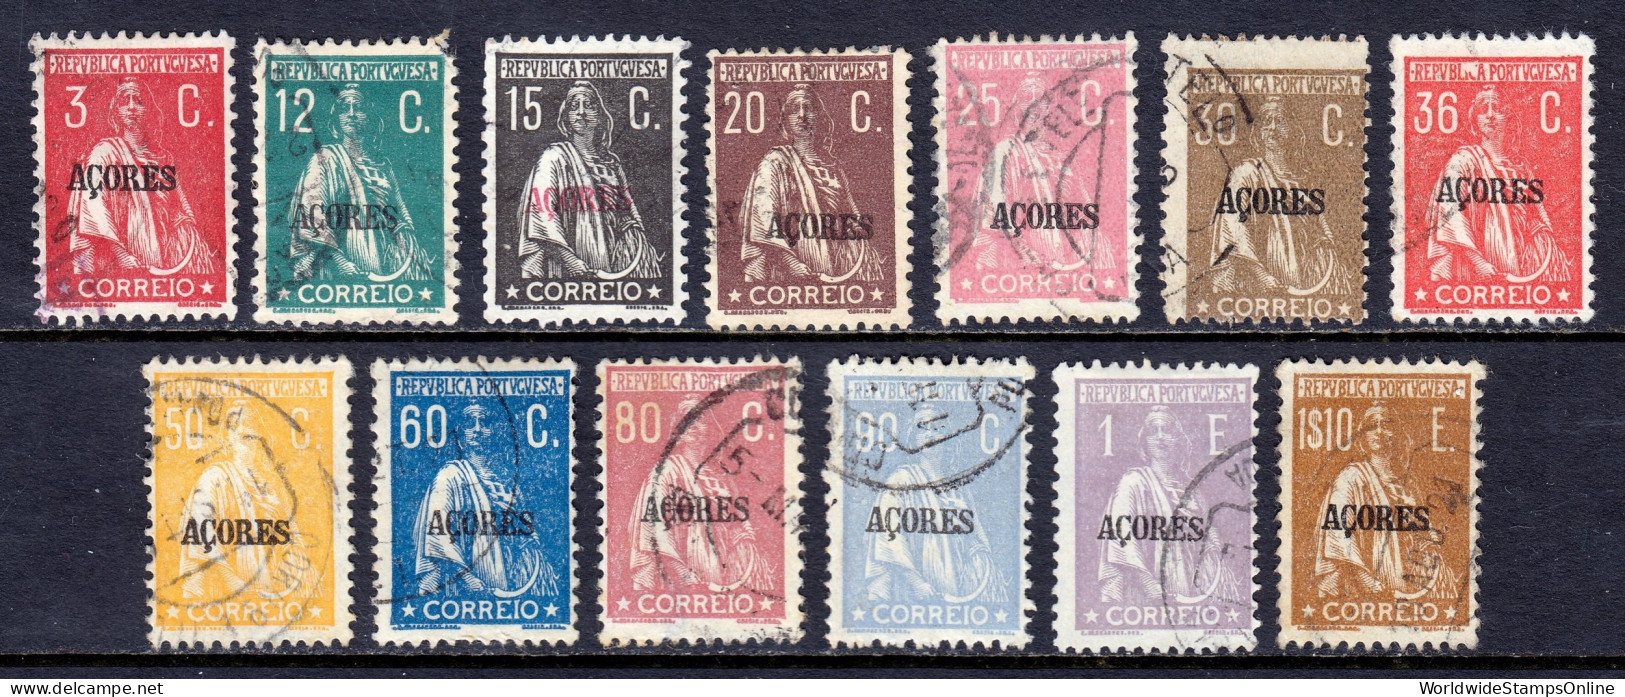 Azores - Scott #200//234 - Used - P12 X 11½ - A Few Faults - SCV $16 - Azores